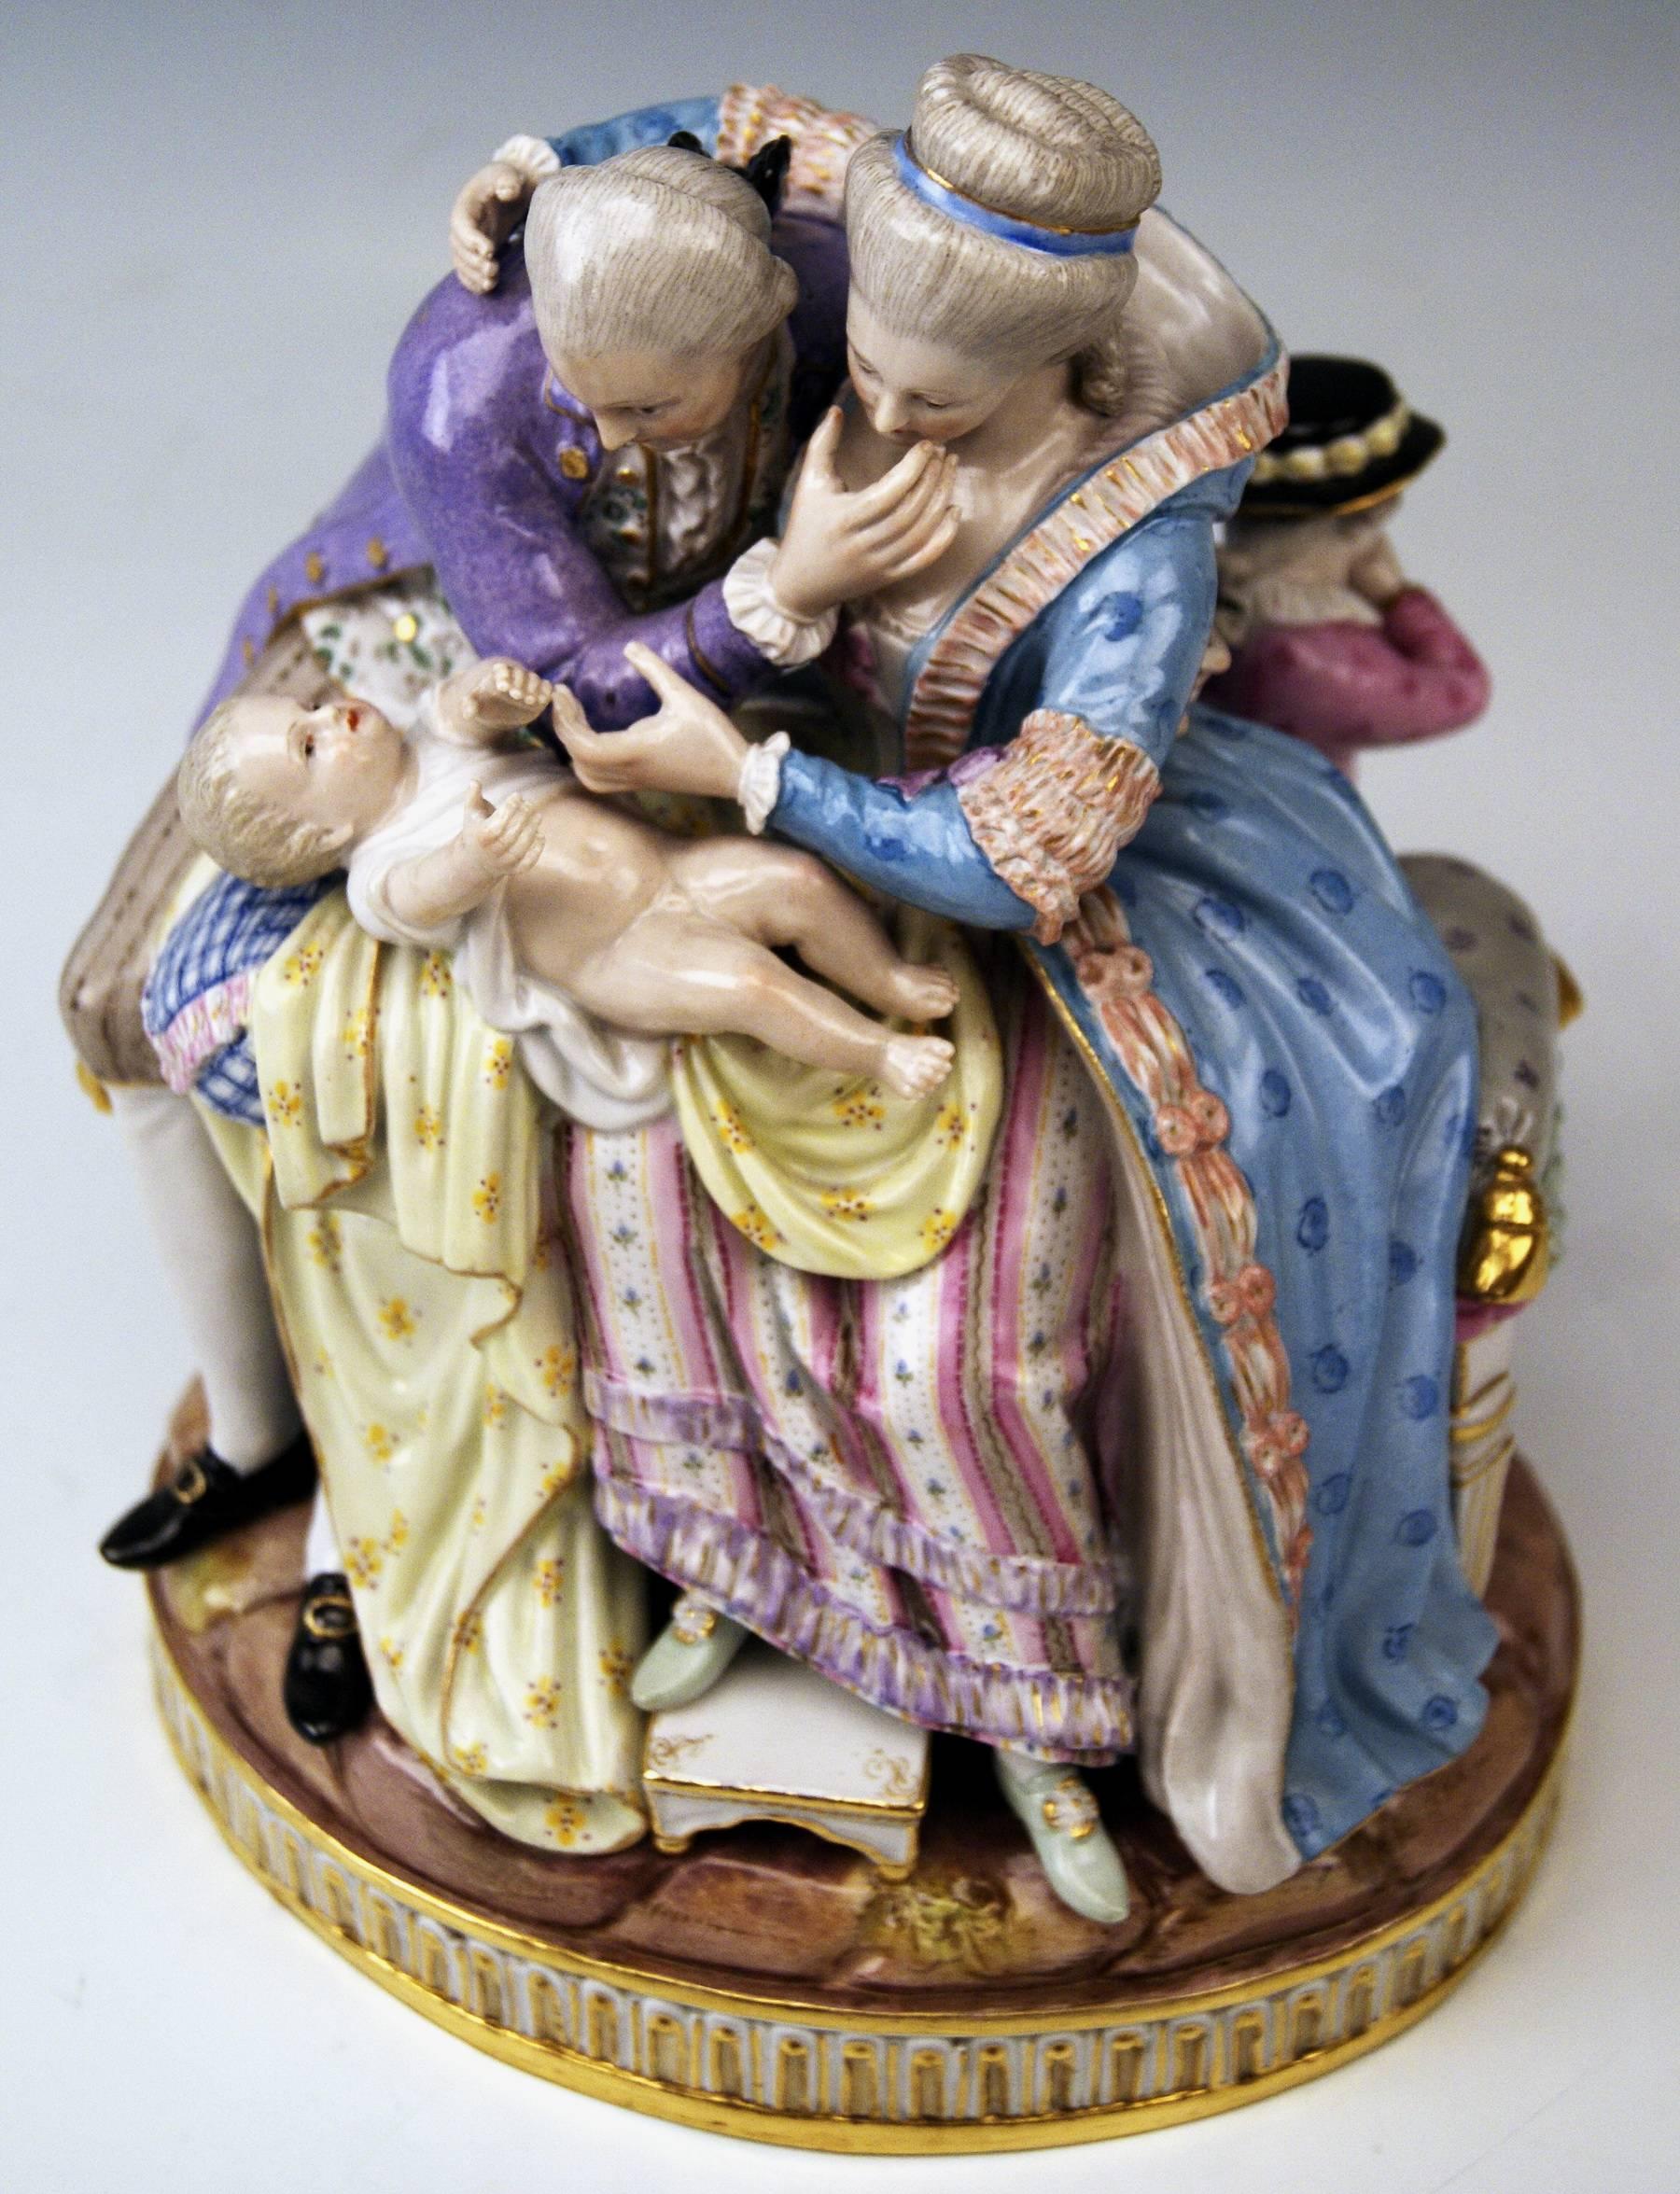 19th Century Meissen Stunning Figurines the Lucky Parents Model E81 by M. V. Acier, c.1860